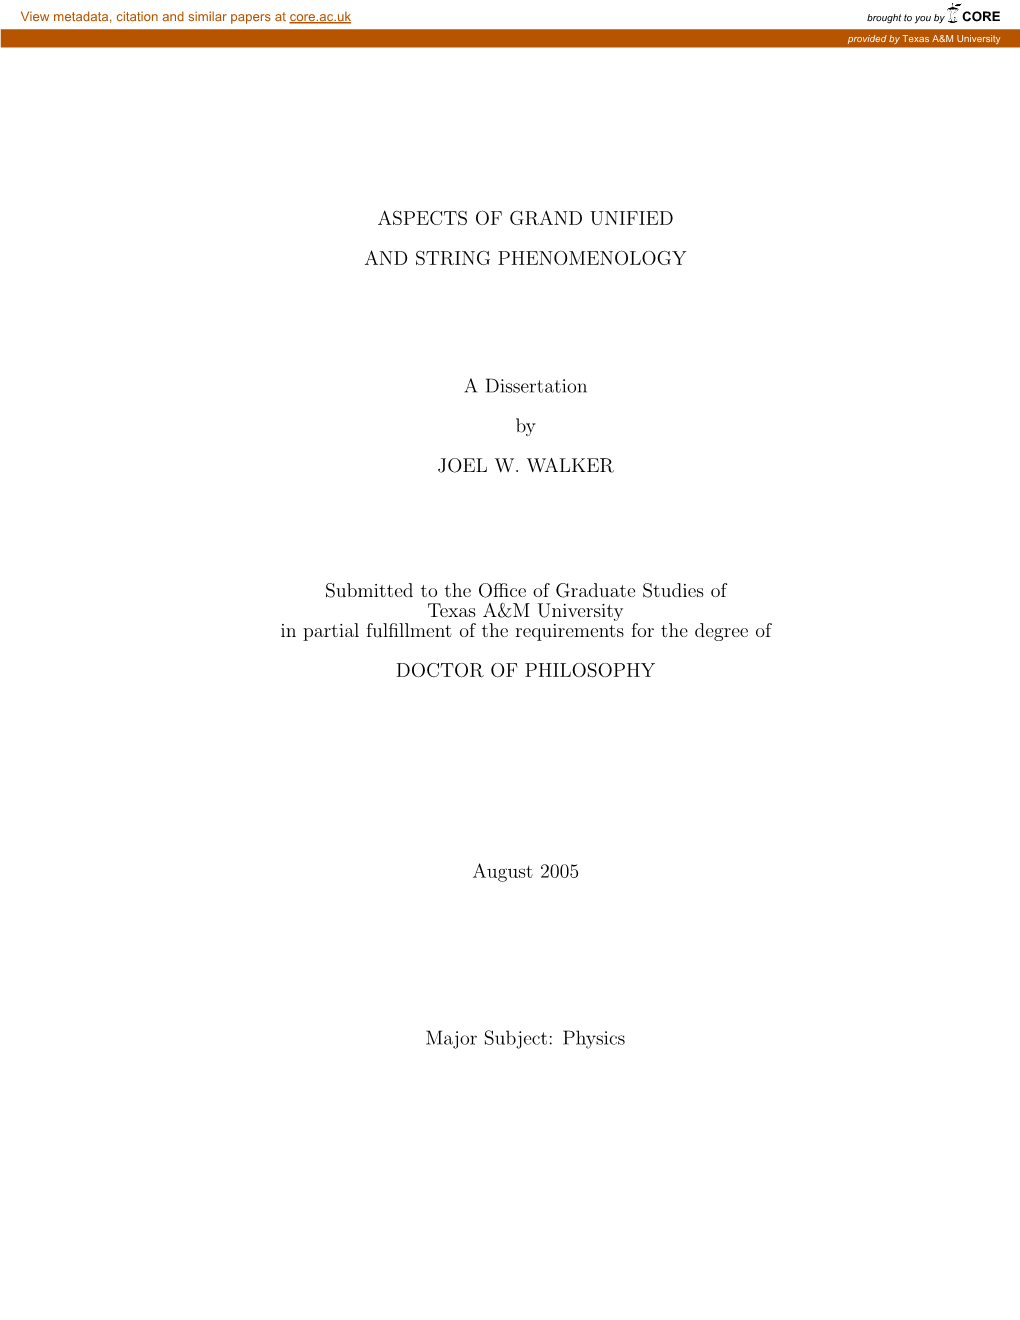 ASPECTS of GRAND UNIFIED and STRING PHENOMENOLOGY a Dissertation by JOEL W. WALKER Submitted to the Office of Graduate Studies O